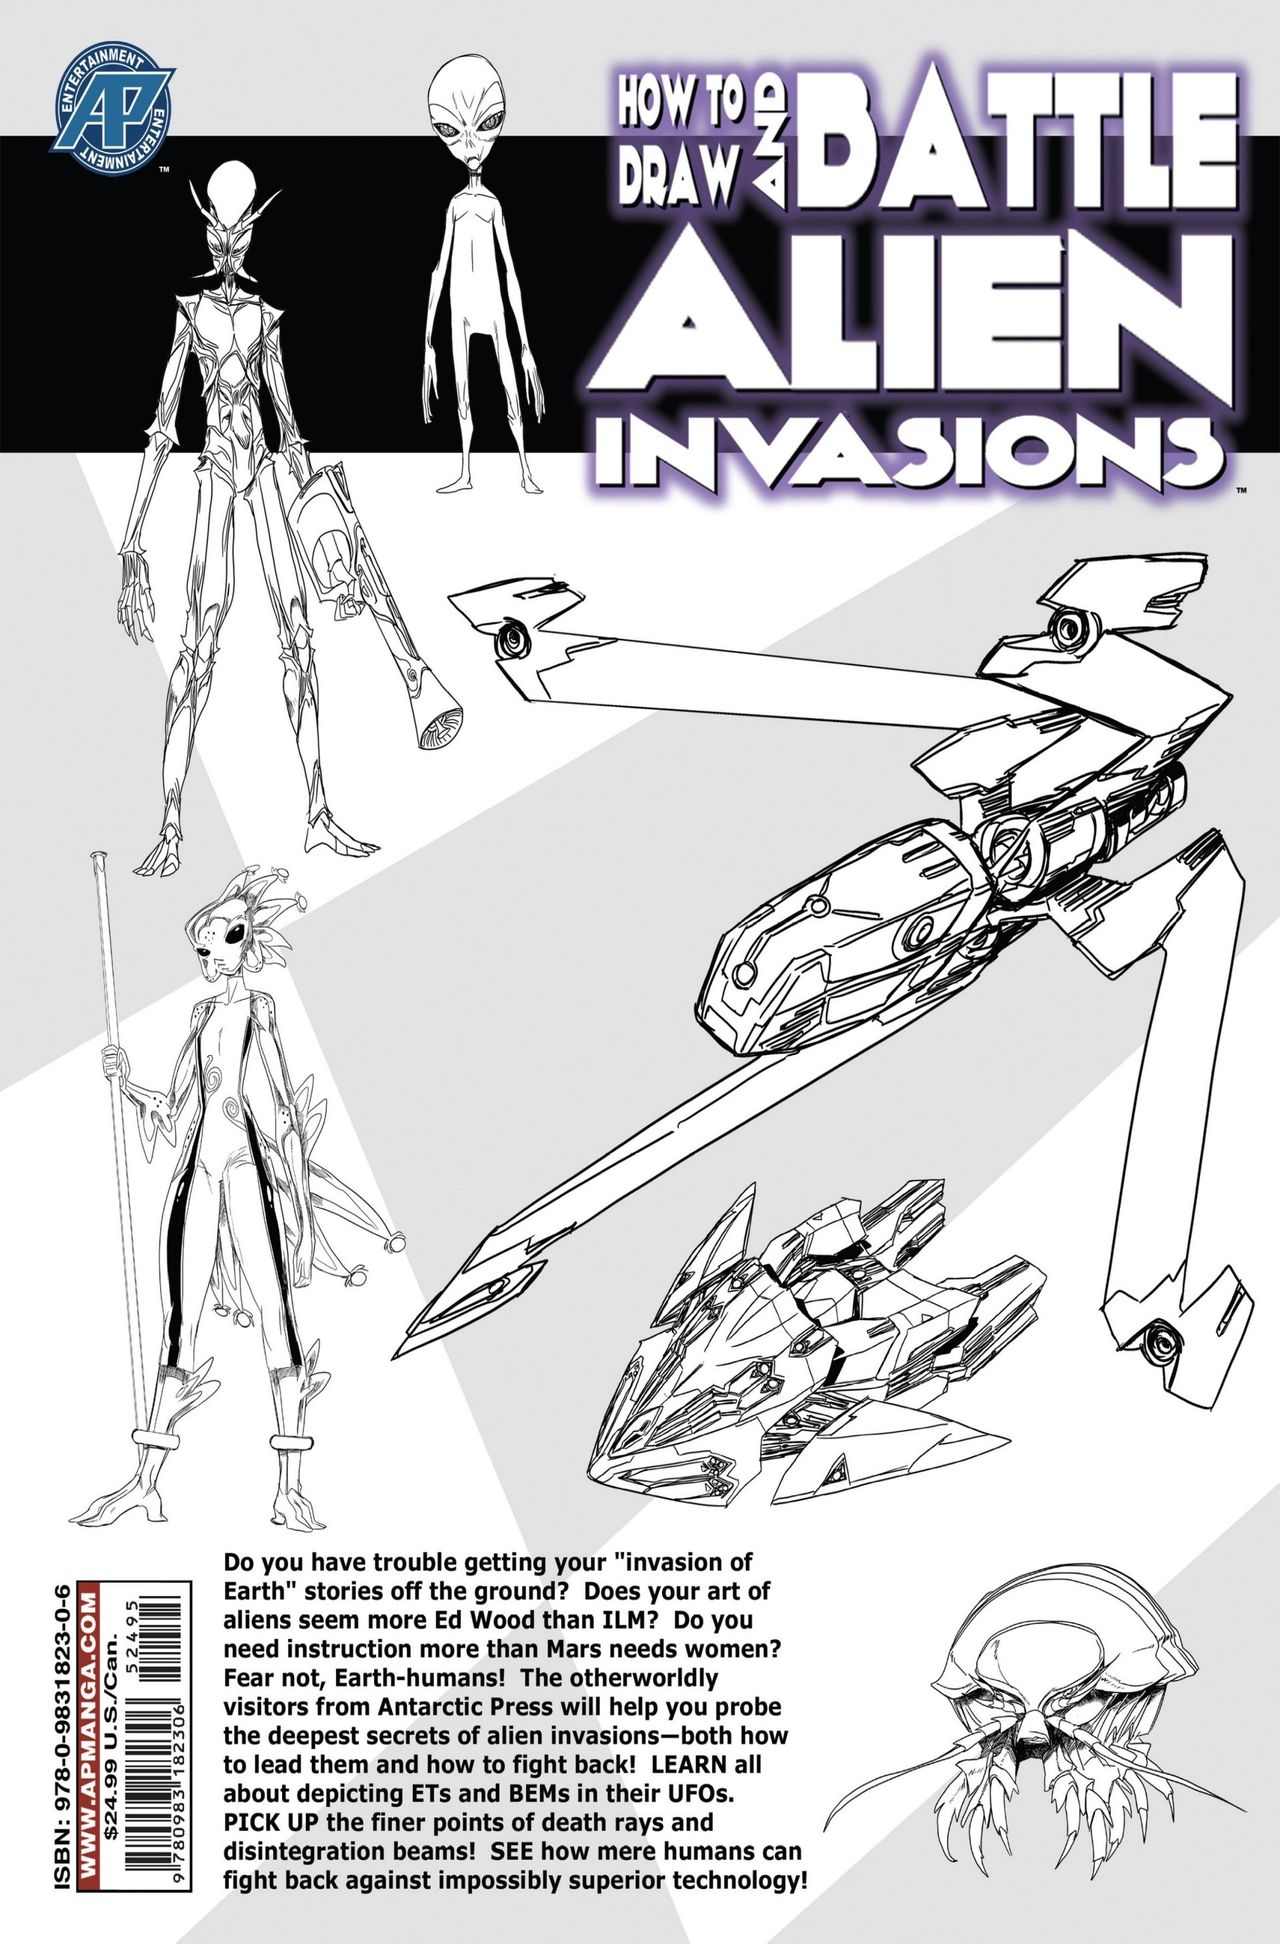 How To Draw And Battle Alien Invasions(2012) 129